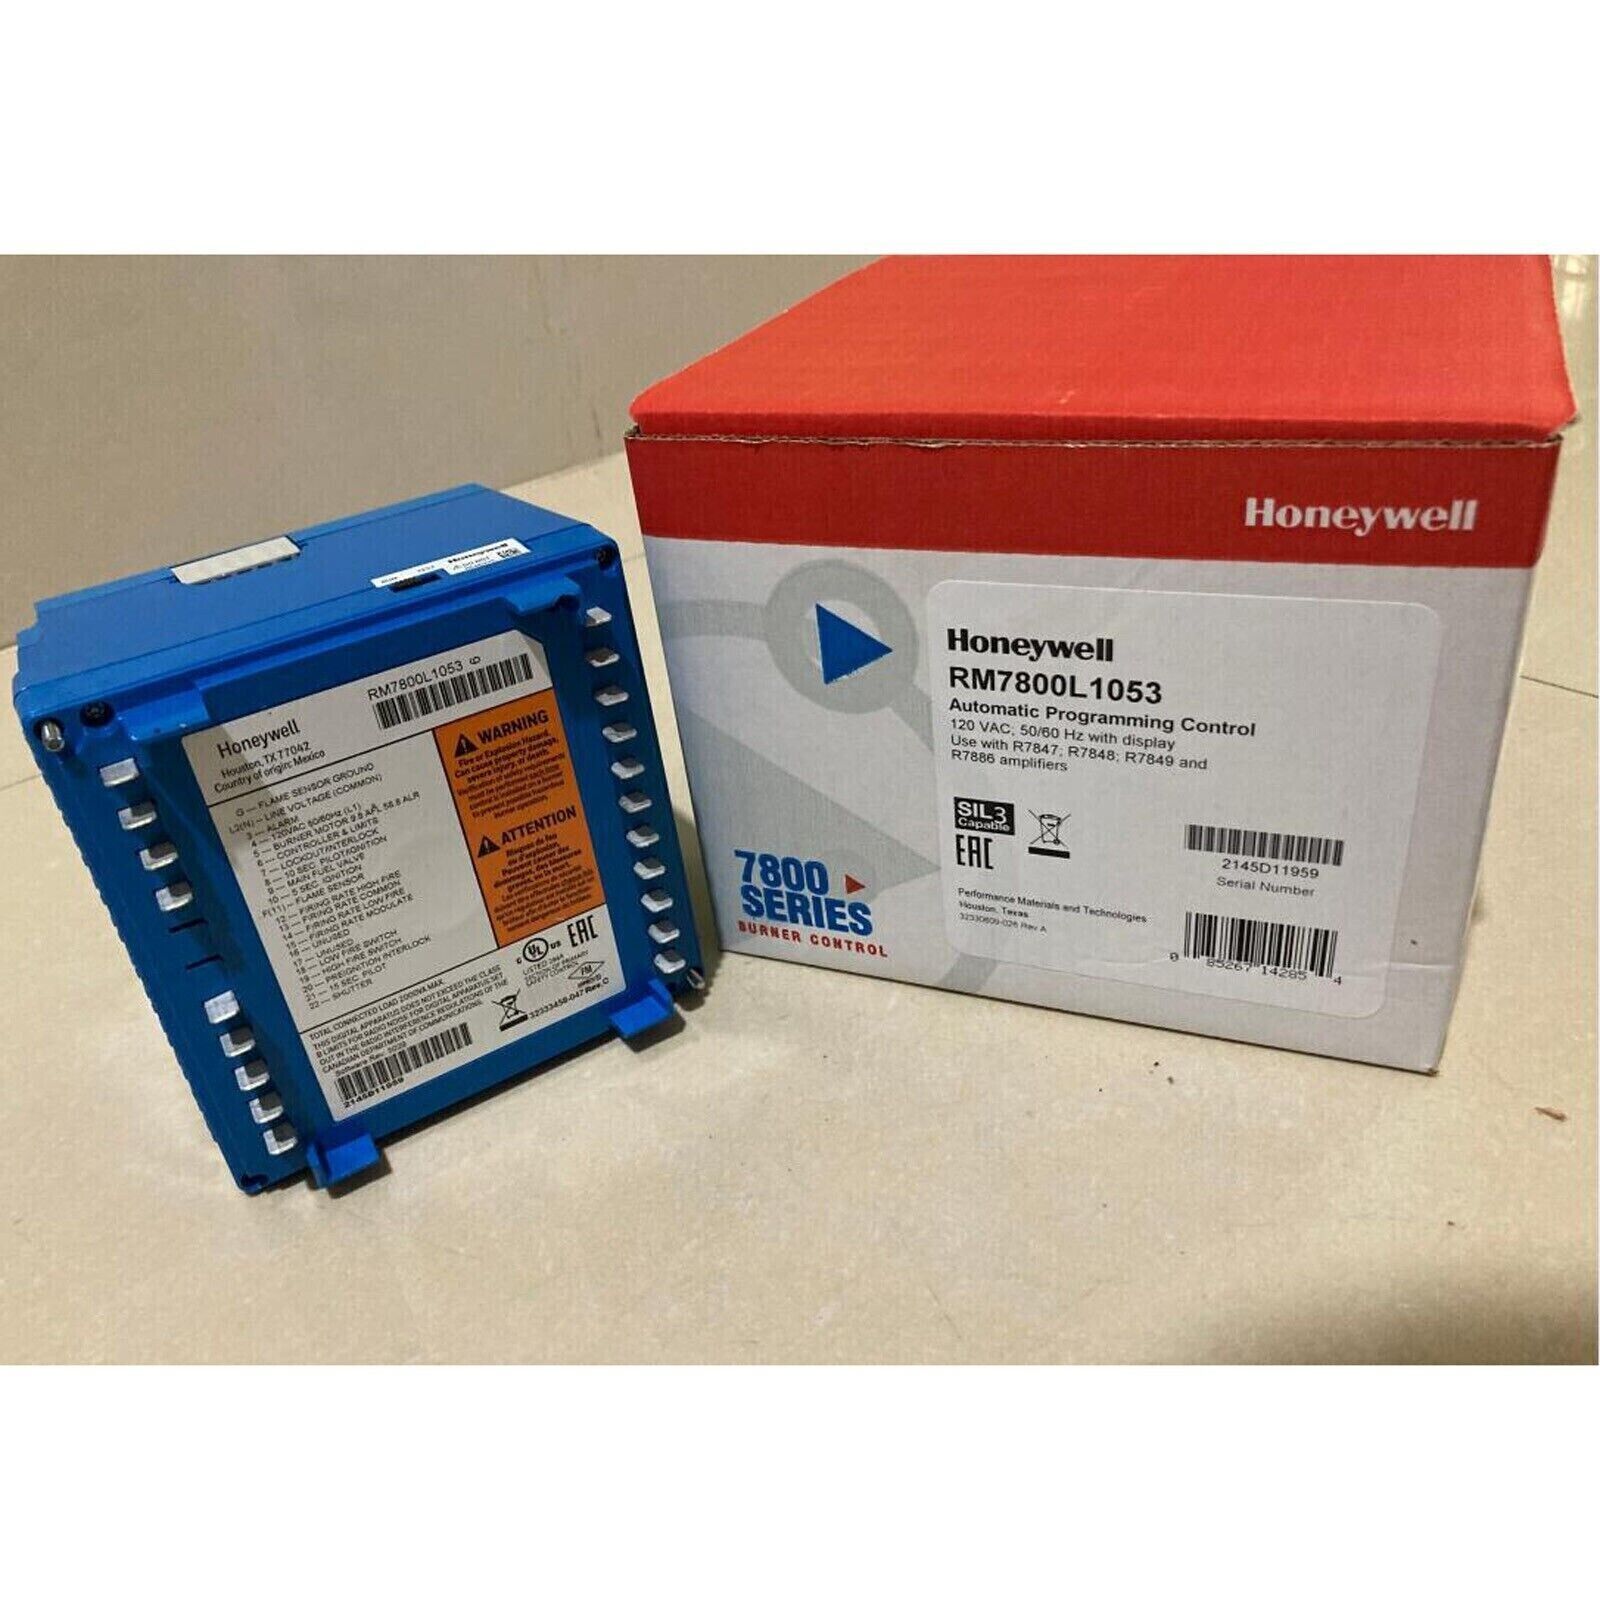 DHL ship NEW Honeywell RM7800L1053 combustion controller RM7800L 1053